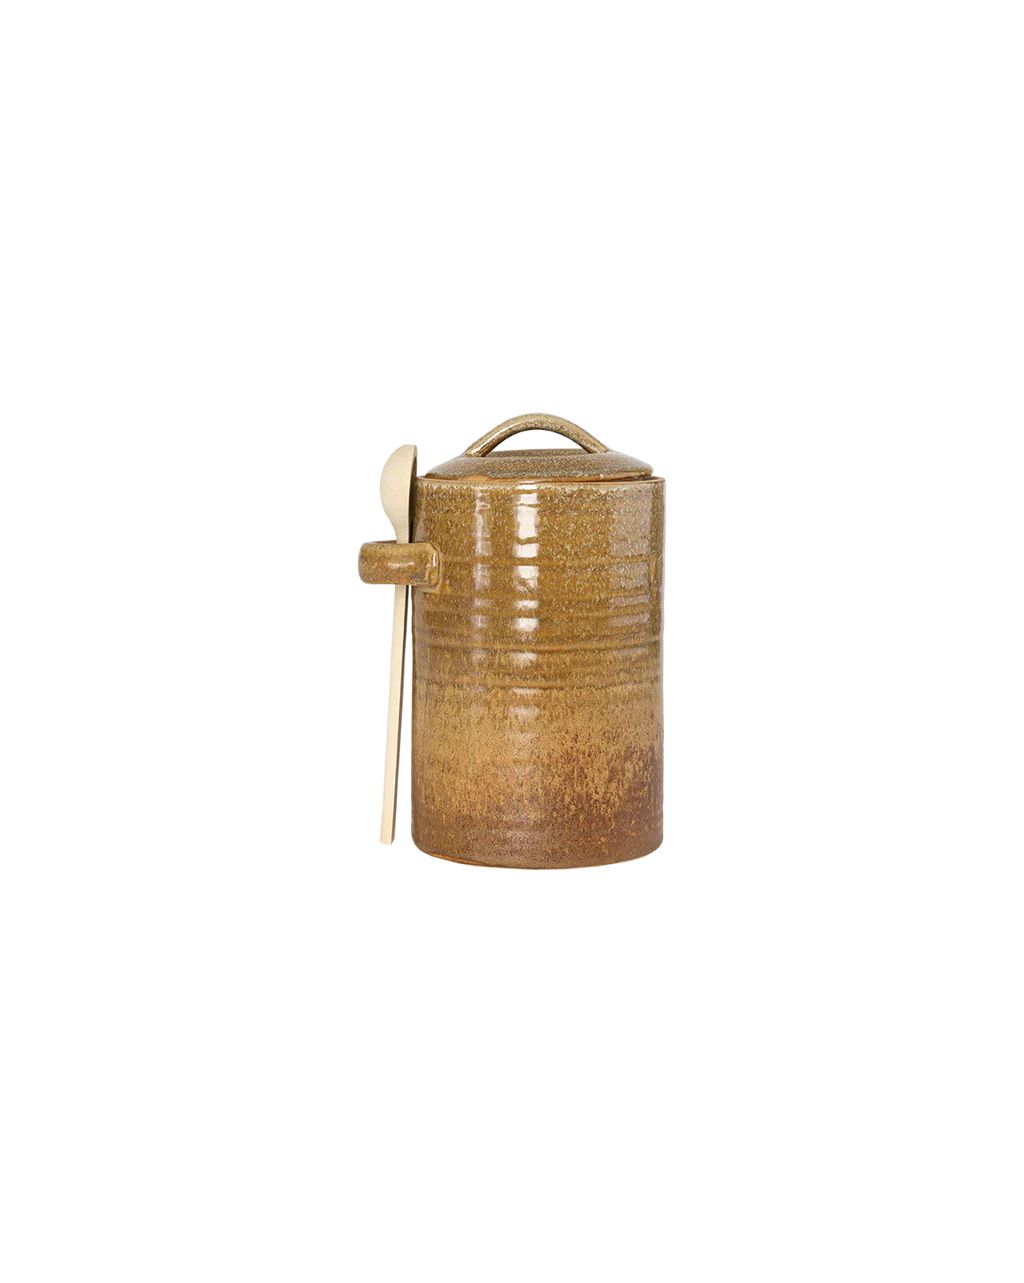 Mustard Canister & Spoon | McGee & Co.